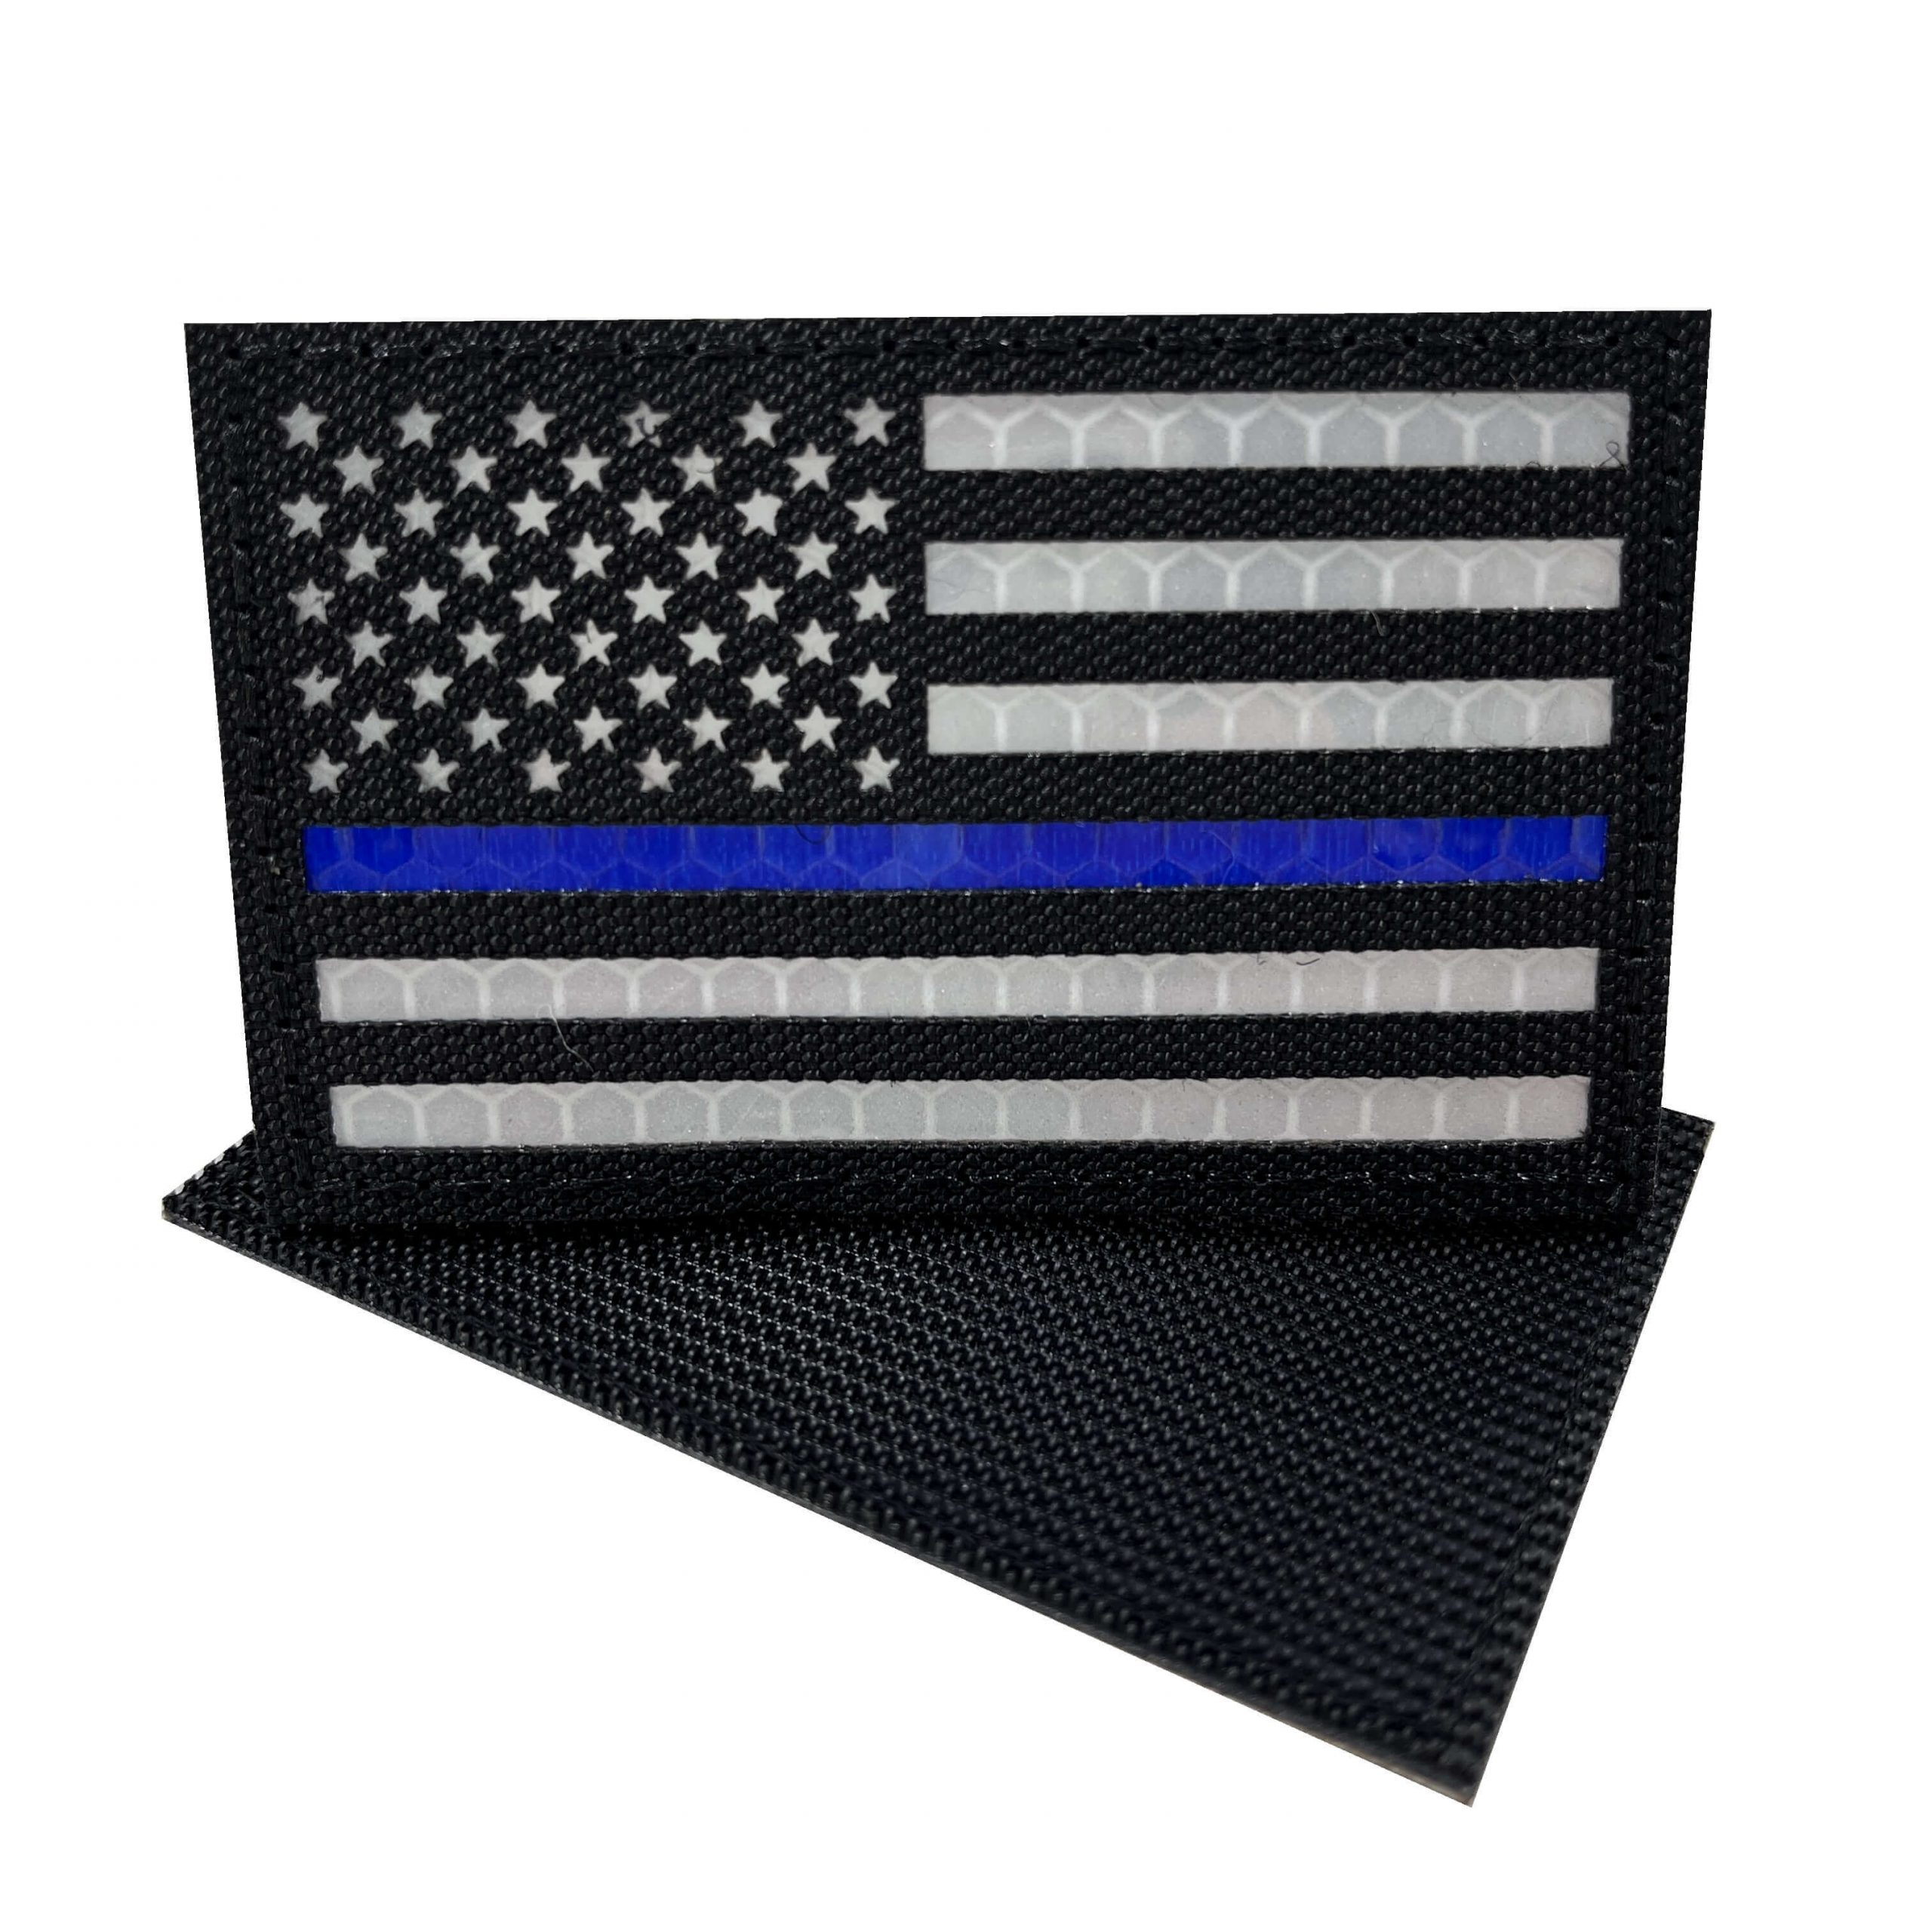 Reflective Laser USA Flag Patch with Thin Blue Line